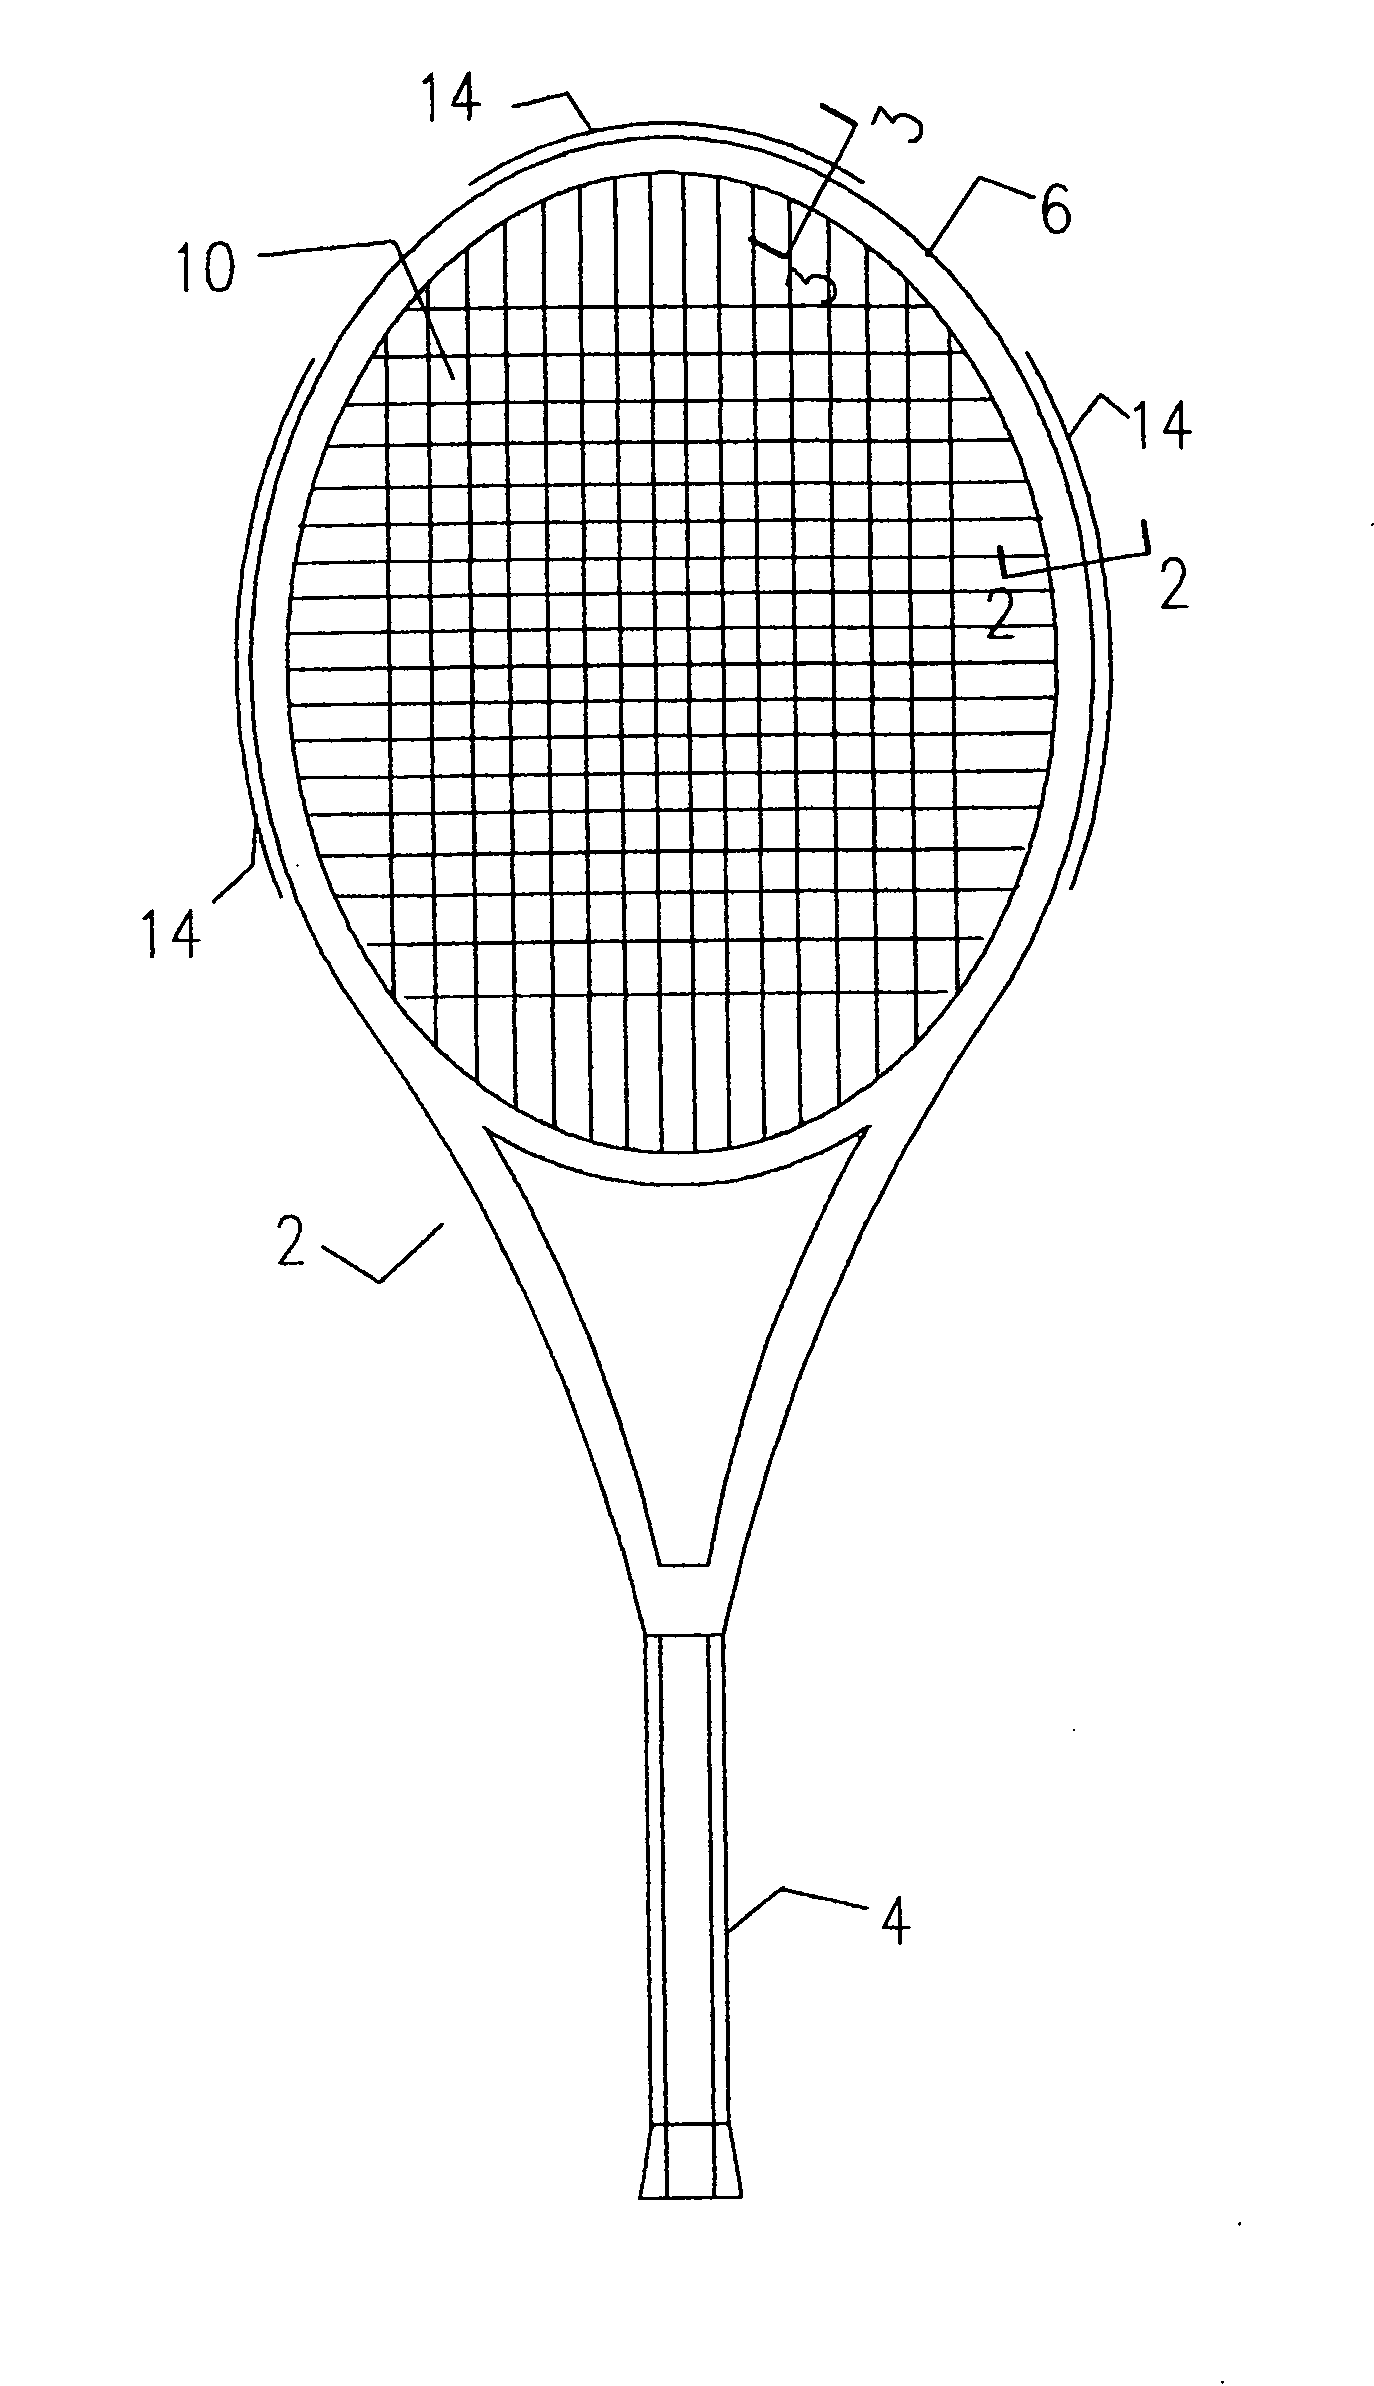 Game racket including a pivot element